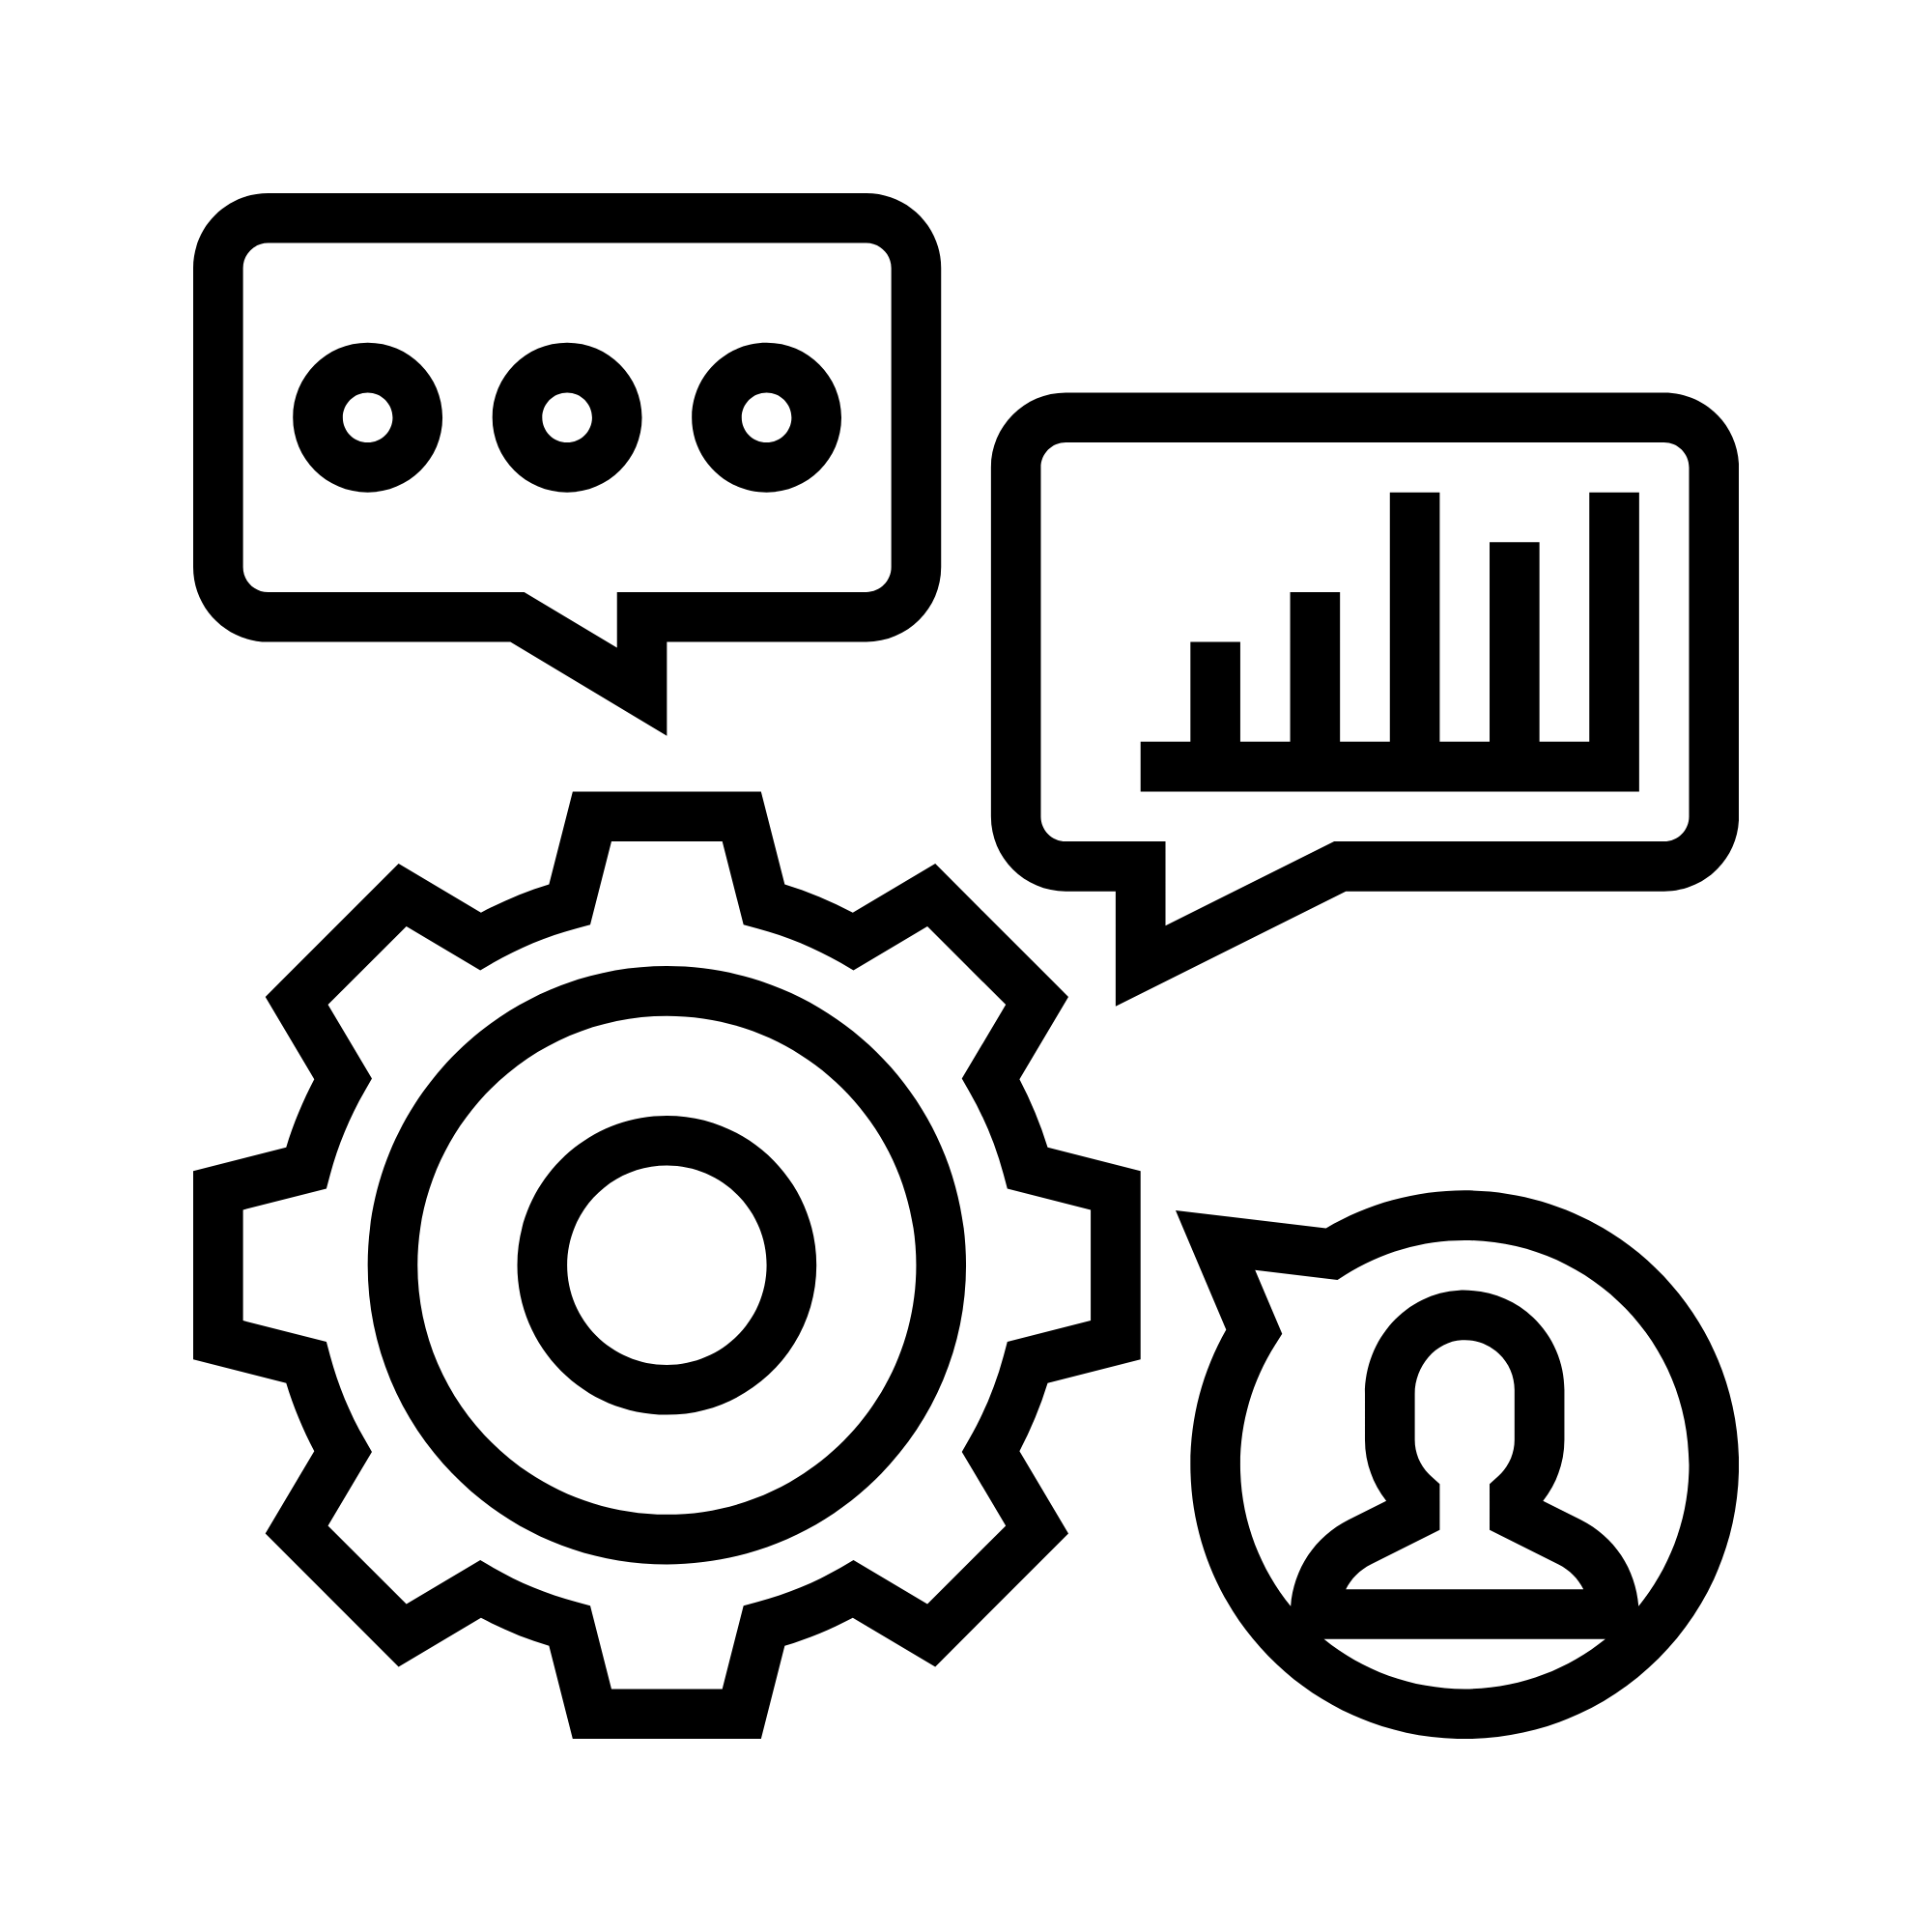 A settings cog icon surrounded by speech bubbles and graphs, representing gaining broad-based exposure under the IMDA's AIM Programme